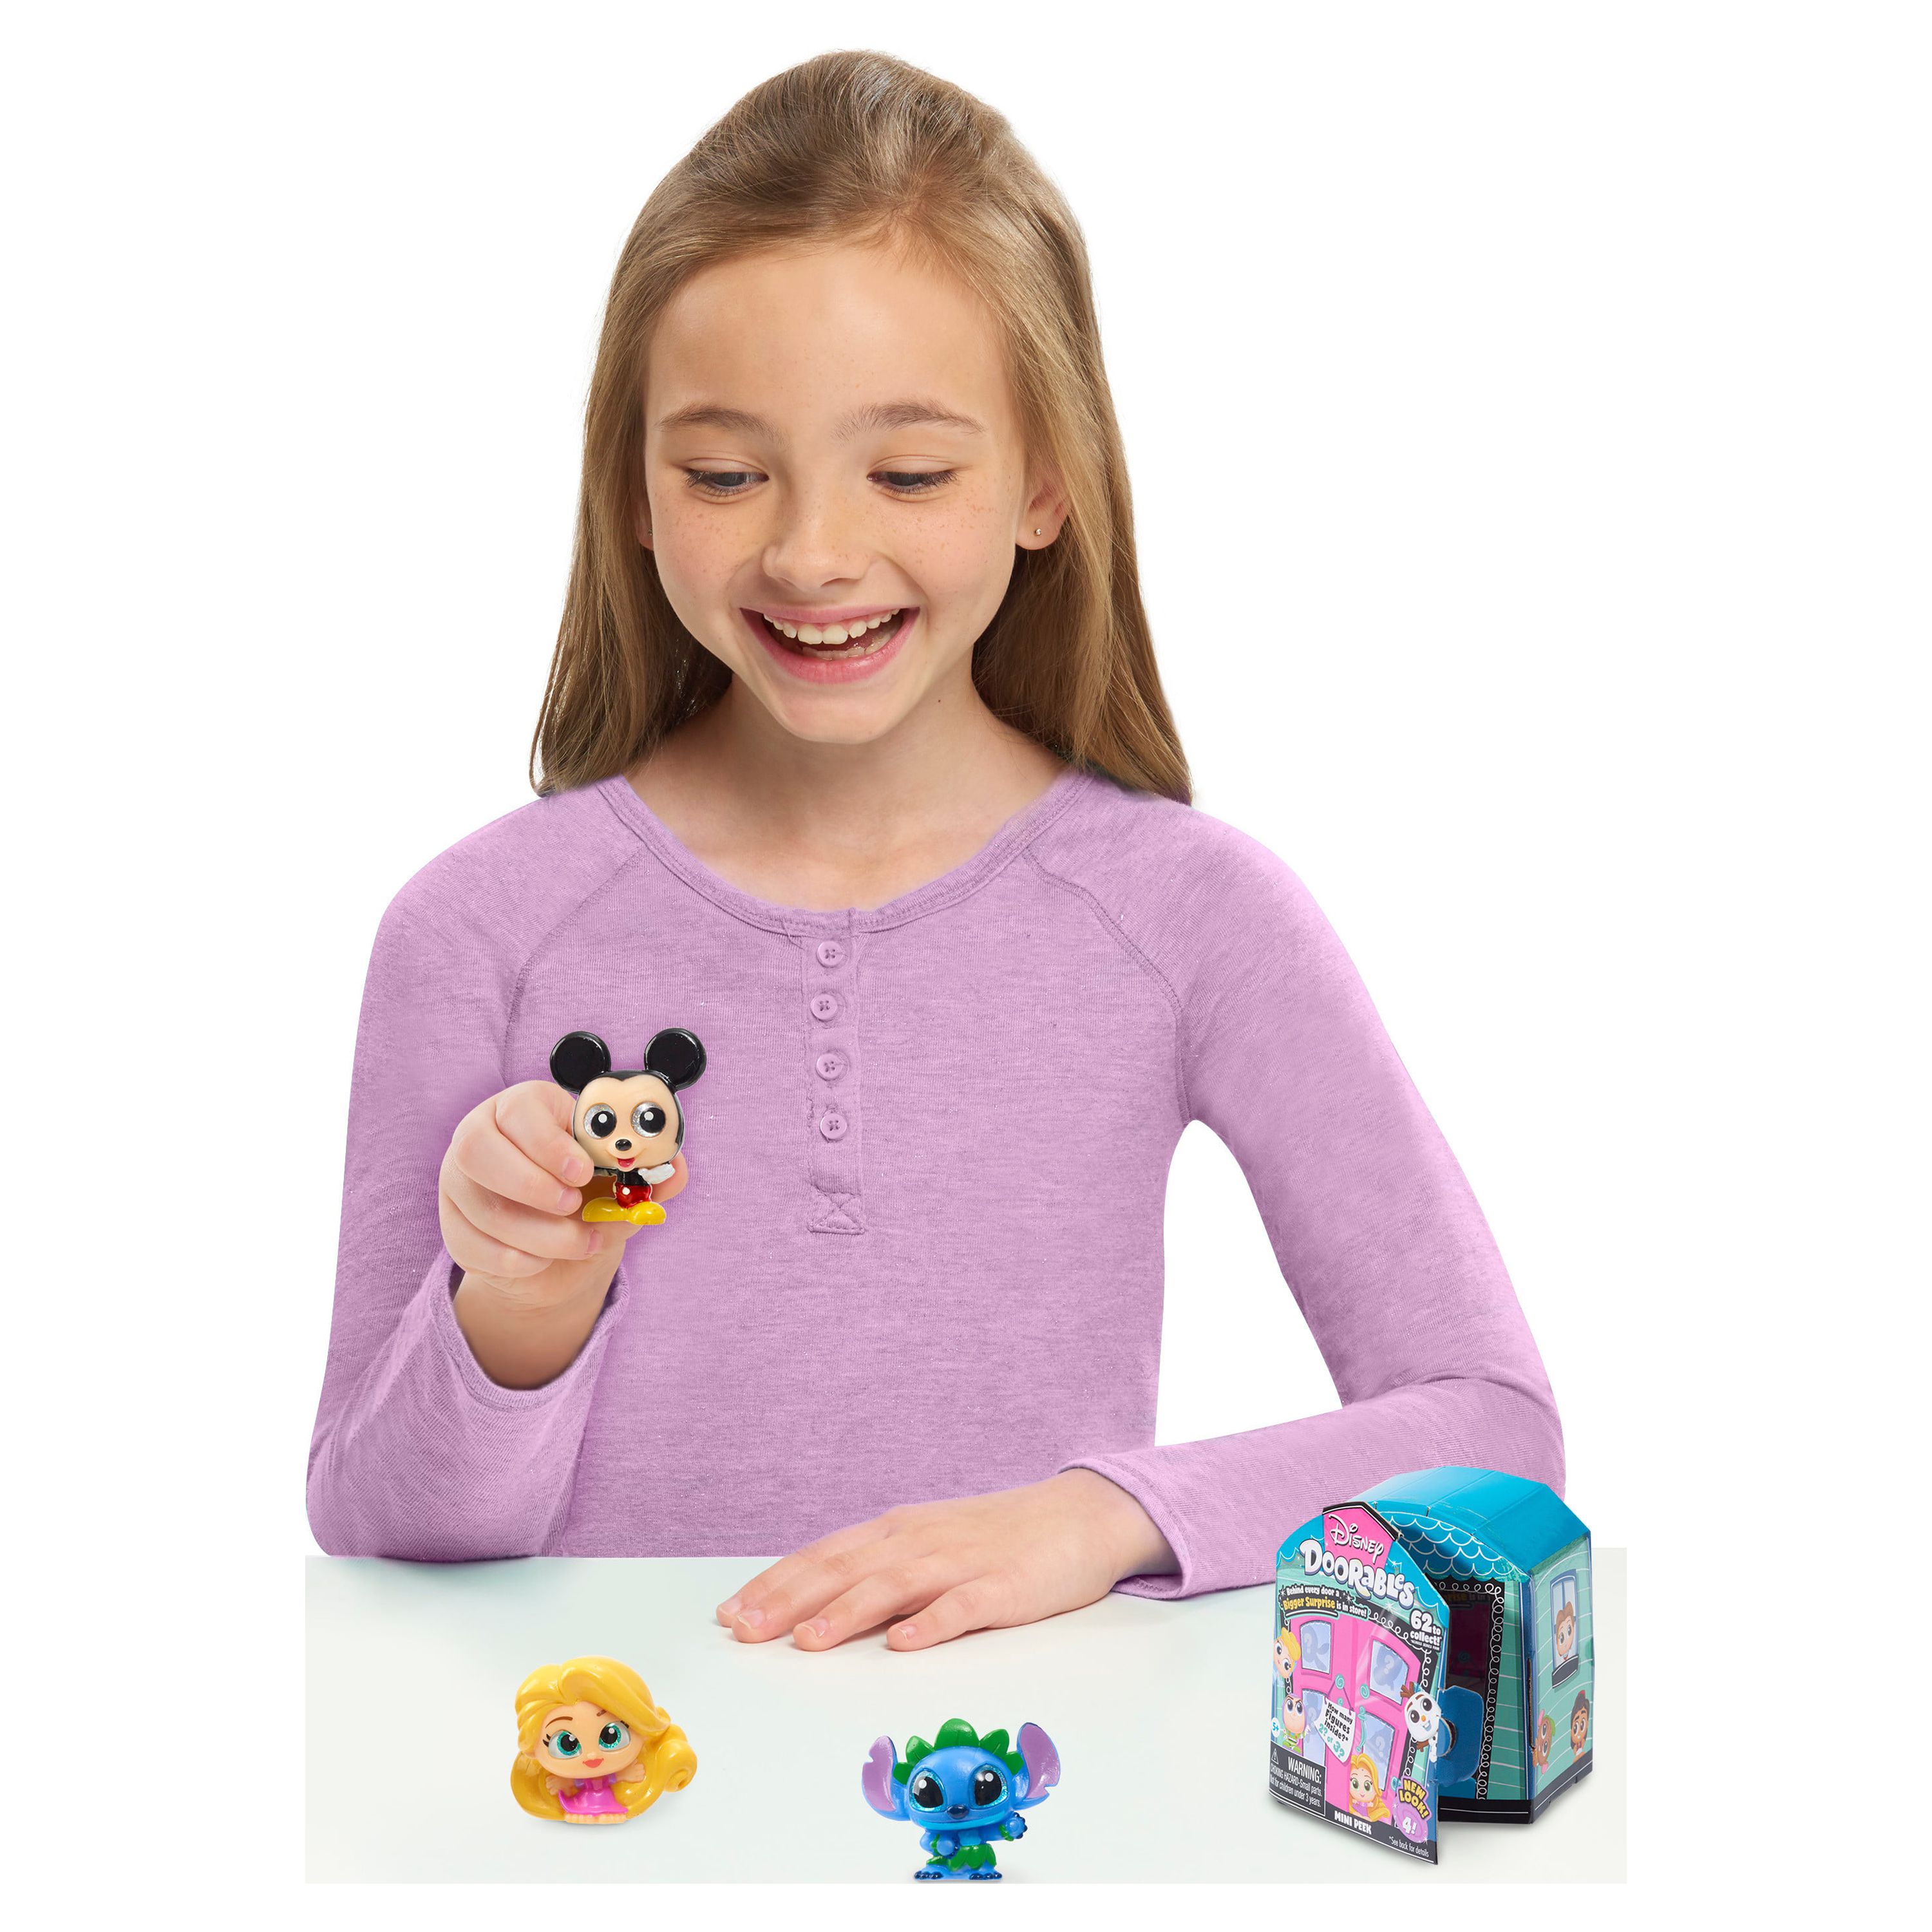 Disney Doorables Mini-Peek Pack Series 4, Officially Licensed Kids Toys for Ages 5 Up, Gifts and Presents - image 2 of 3